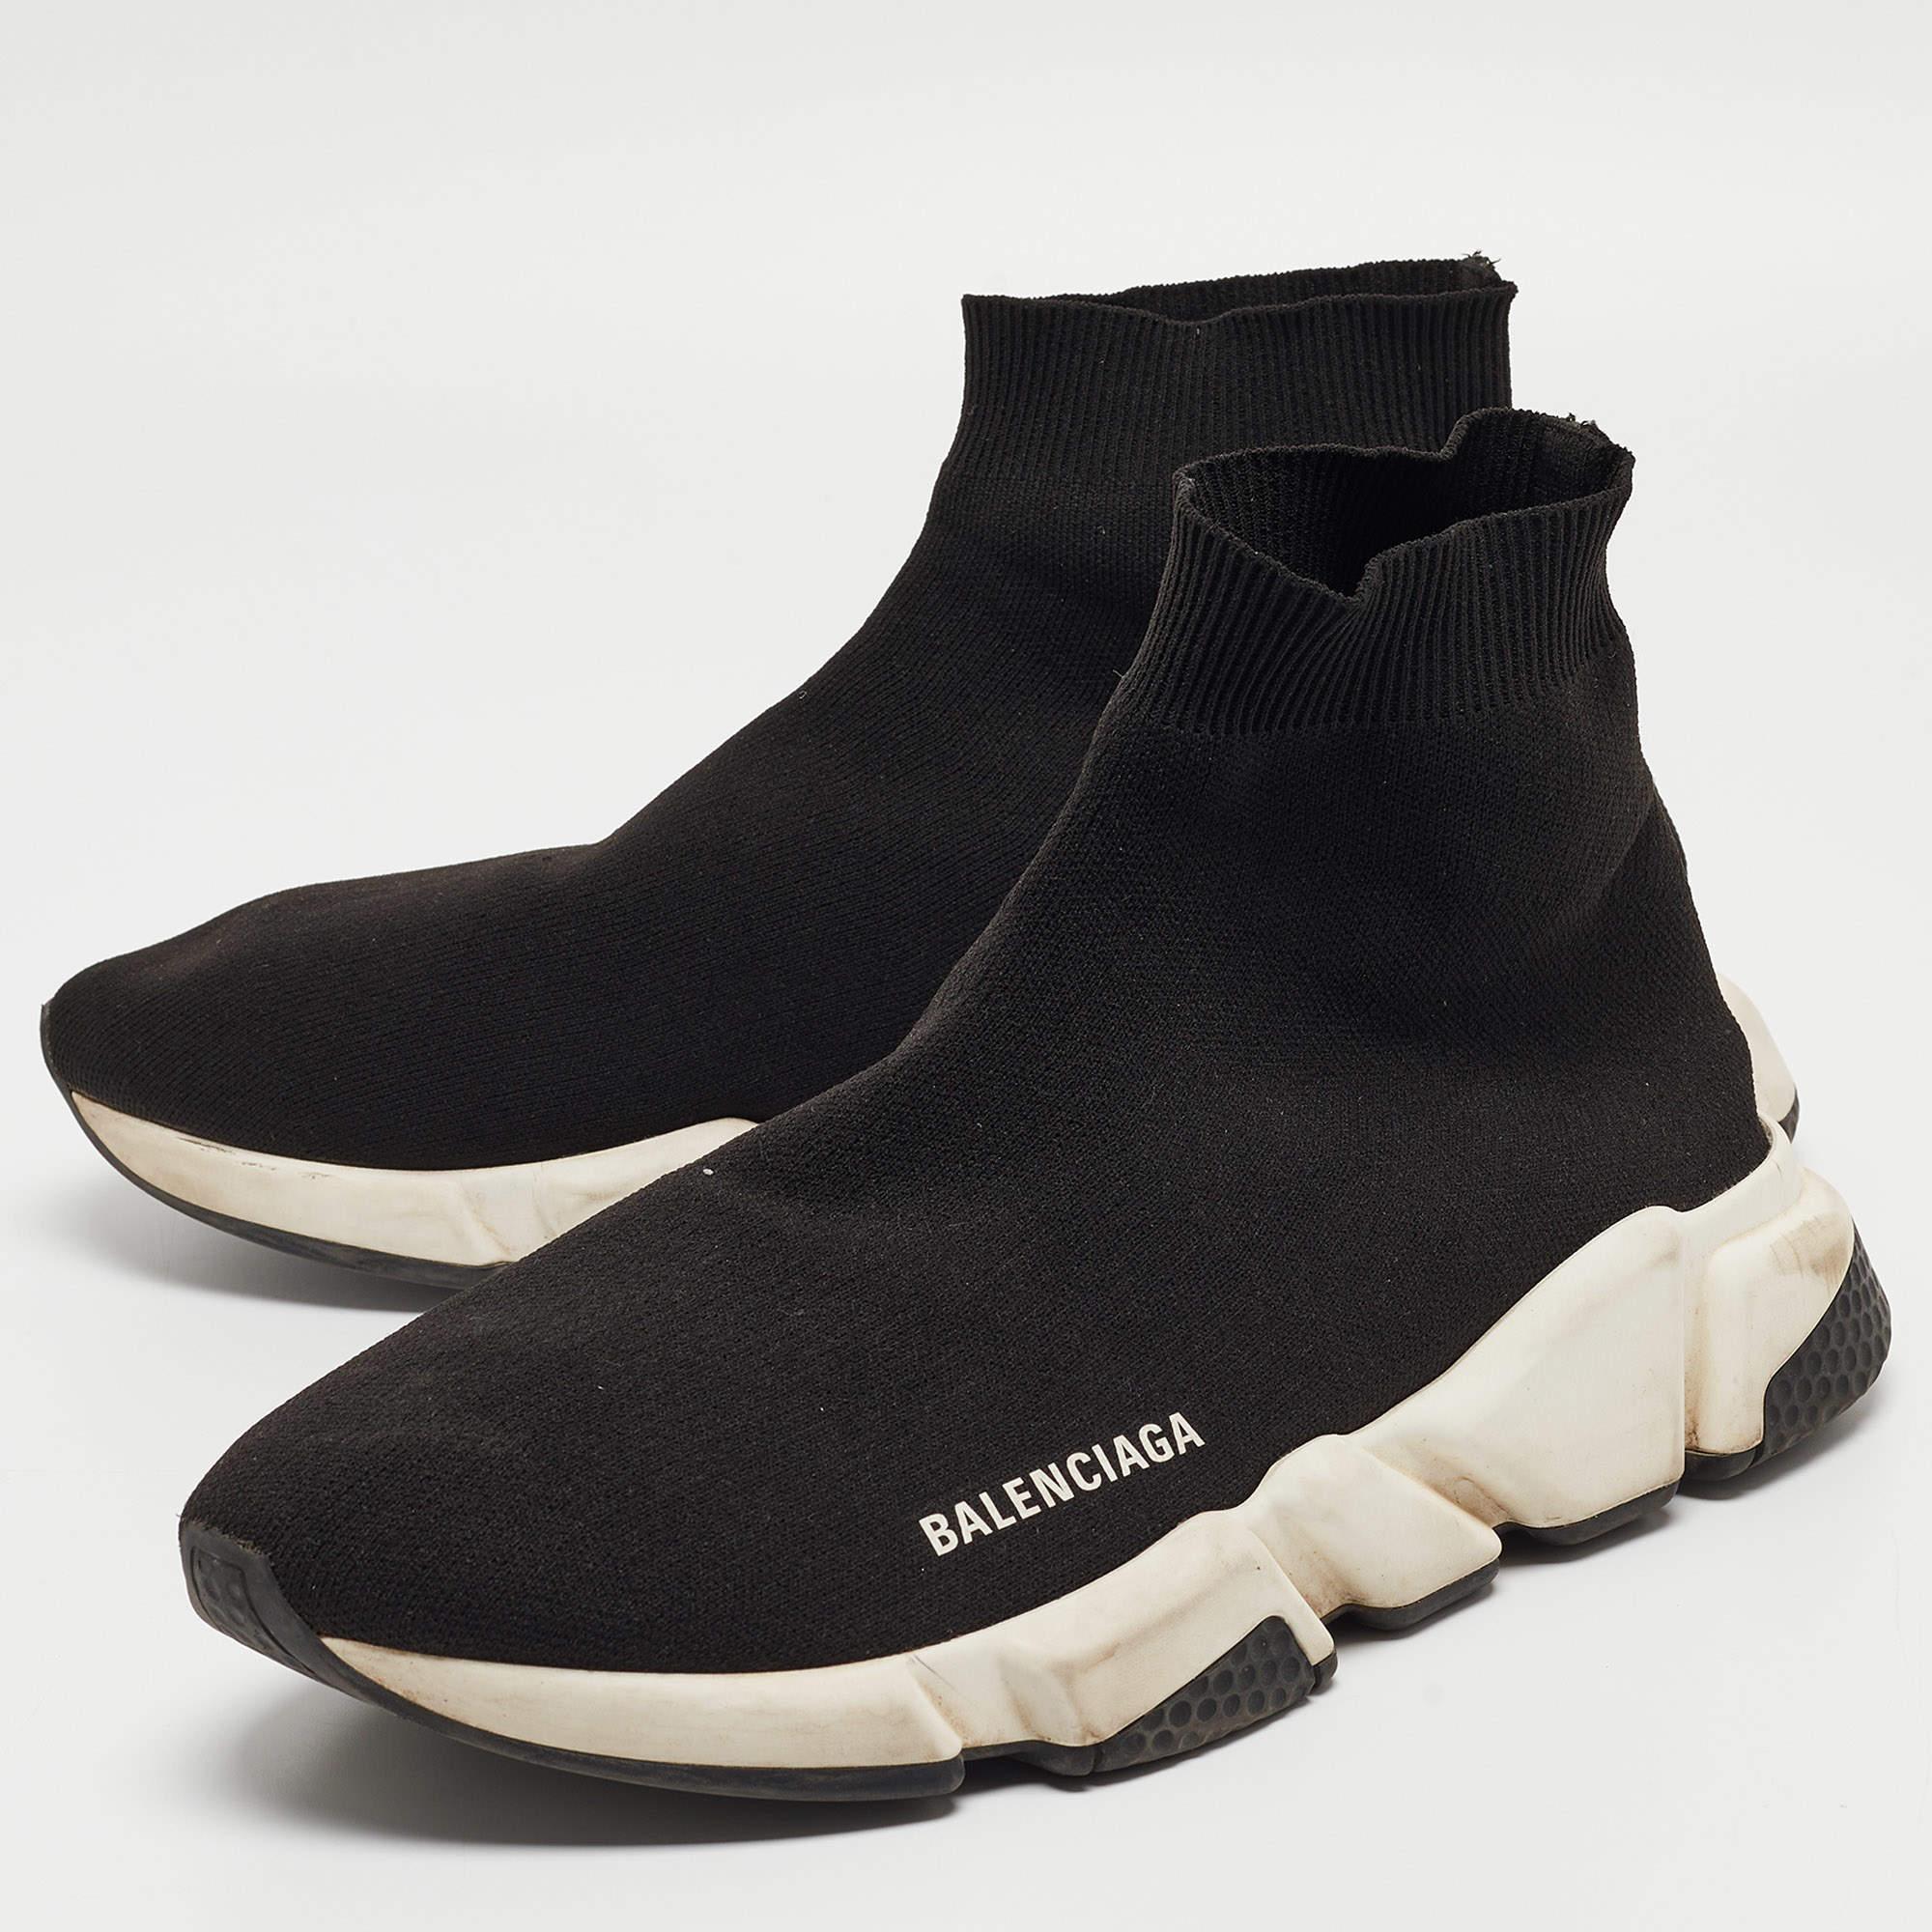 Balenciaga Black Knit Fabric Speed Trainer Sneakers Size 43 For Sale 2